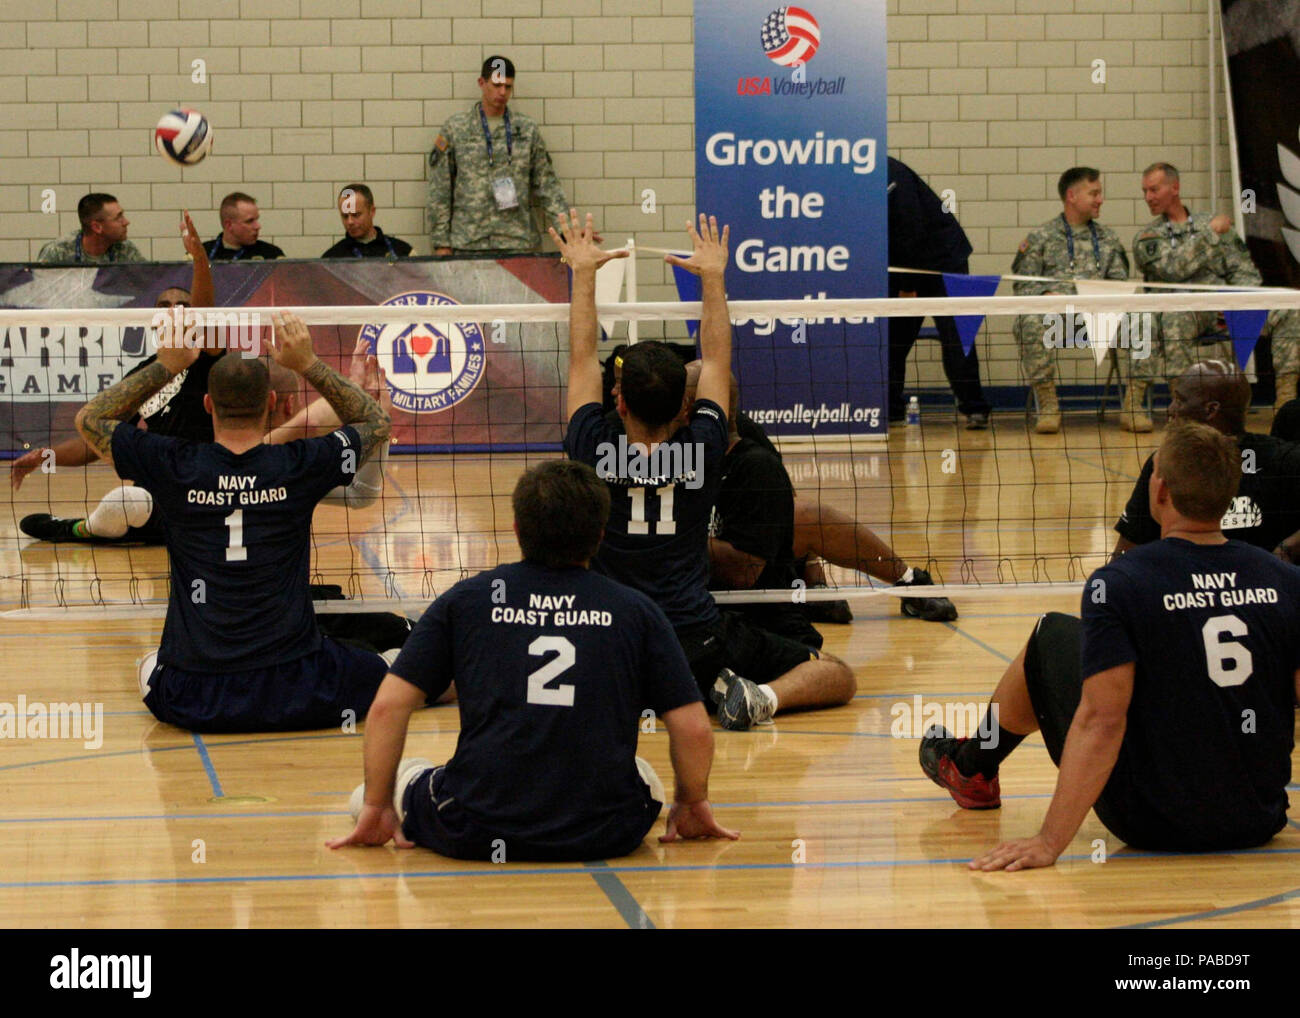 Team Navy/Coast Guard members strategically position themselves in a game of seated volleyball  against Team Army during the 2013 Warrior Games May 14. The Warrior Games includes competitions in archery, cycling, seated volleyball, shooting, swimming, track and field, and wheelchair basketball. The goal of the Warrior Games is not necessarily to identify the most skilled athletes, but rather to demonstrate the incredible potential of wounded warriors through competitive sports. More than 200 wounded, ill, or injured service members from the U.S. and U.K. armed forces are scheduled to compete i Stock Photo